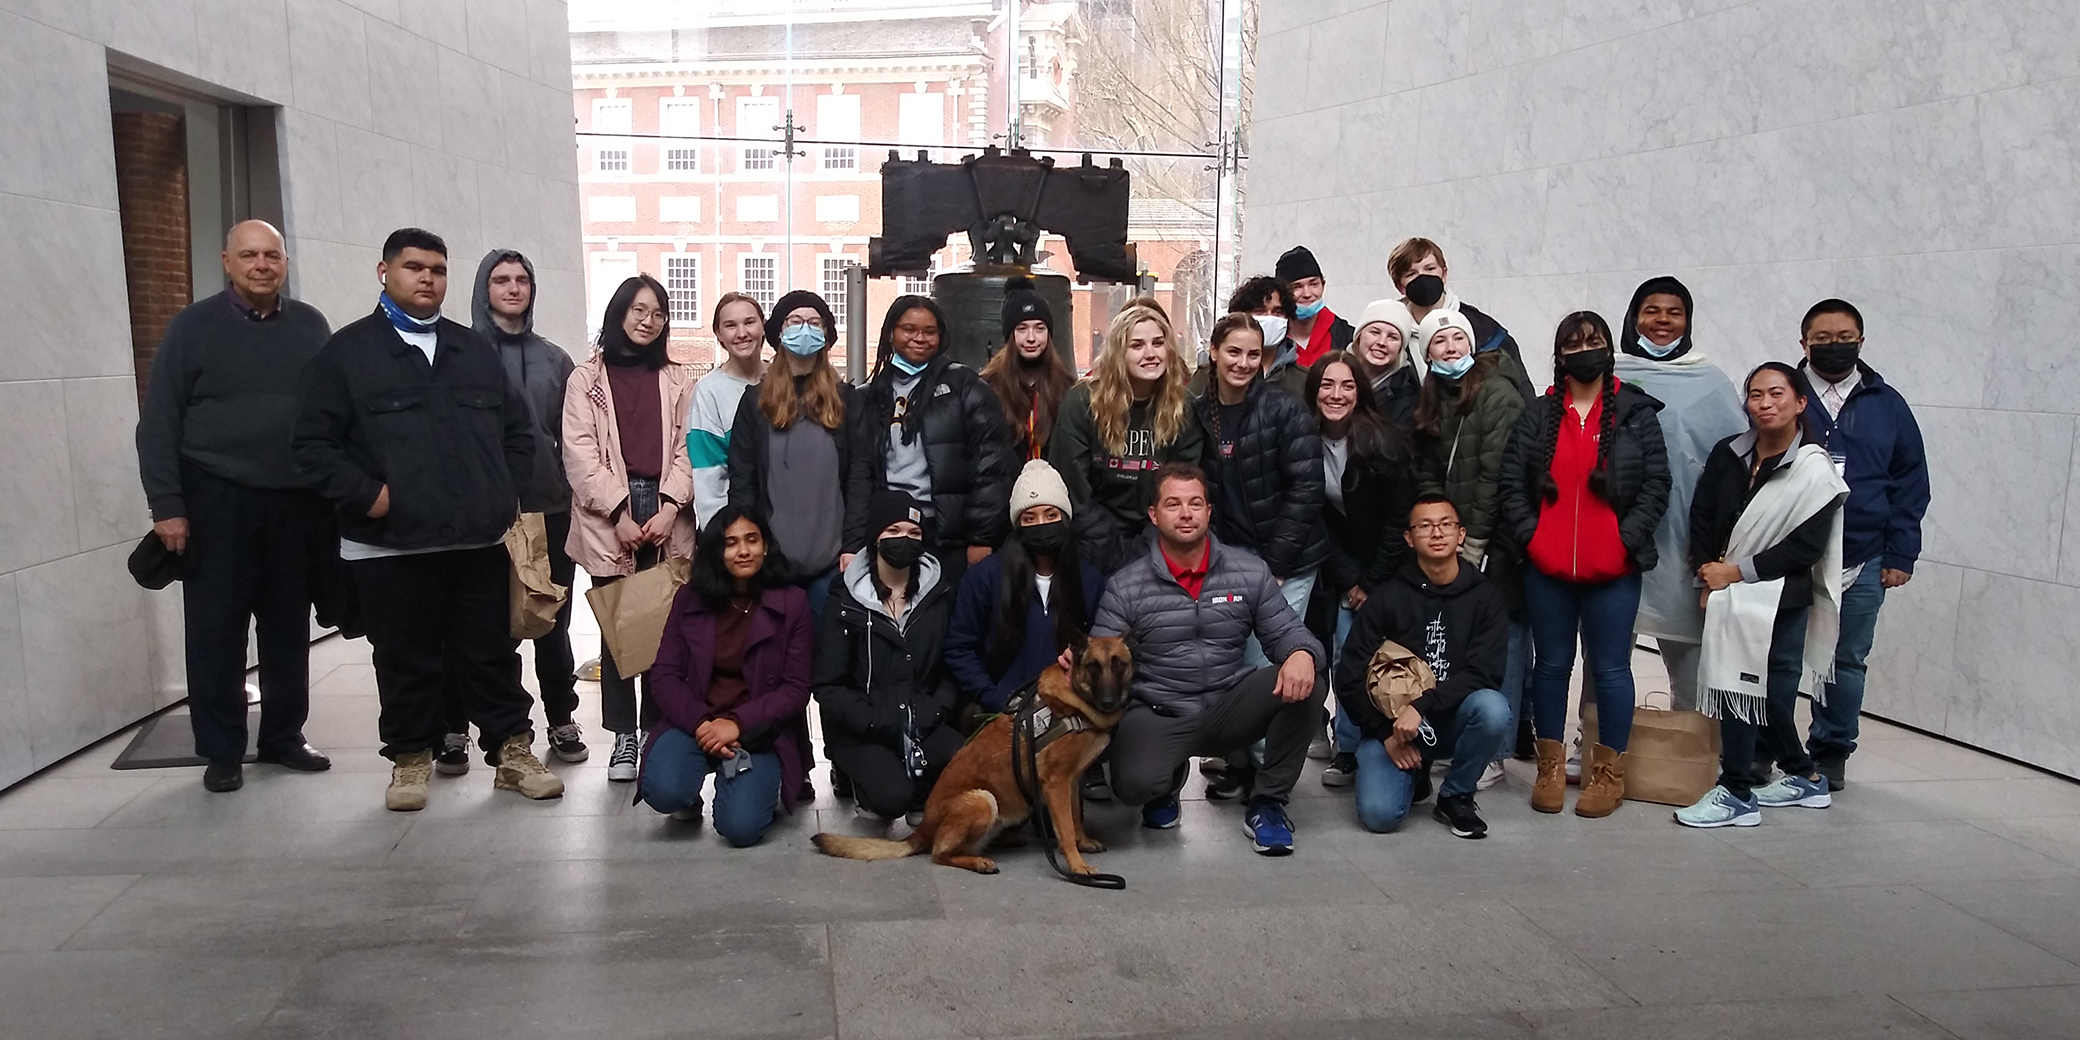 Students group picture at the Liberty Bell Philadelphia